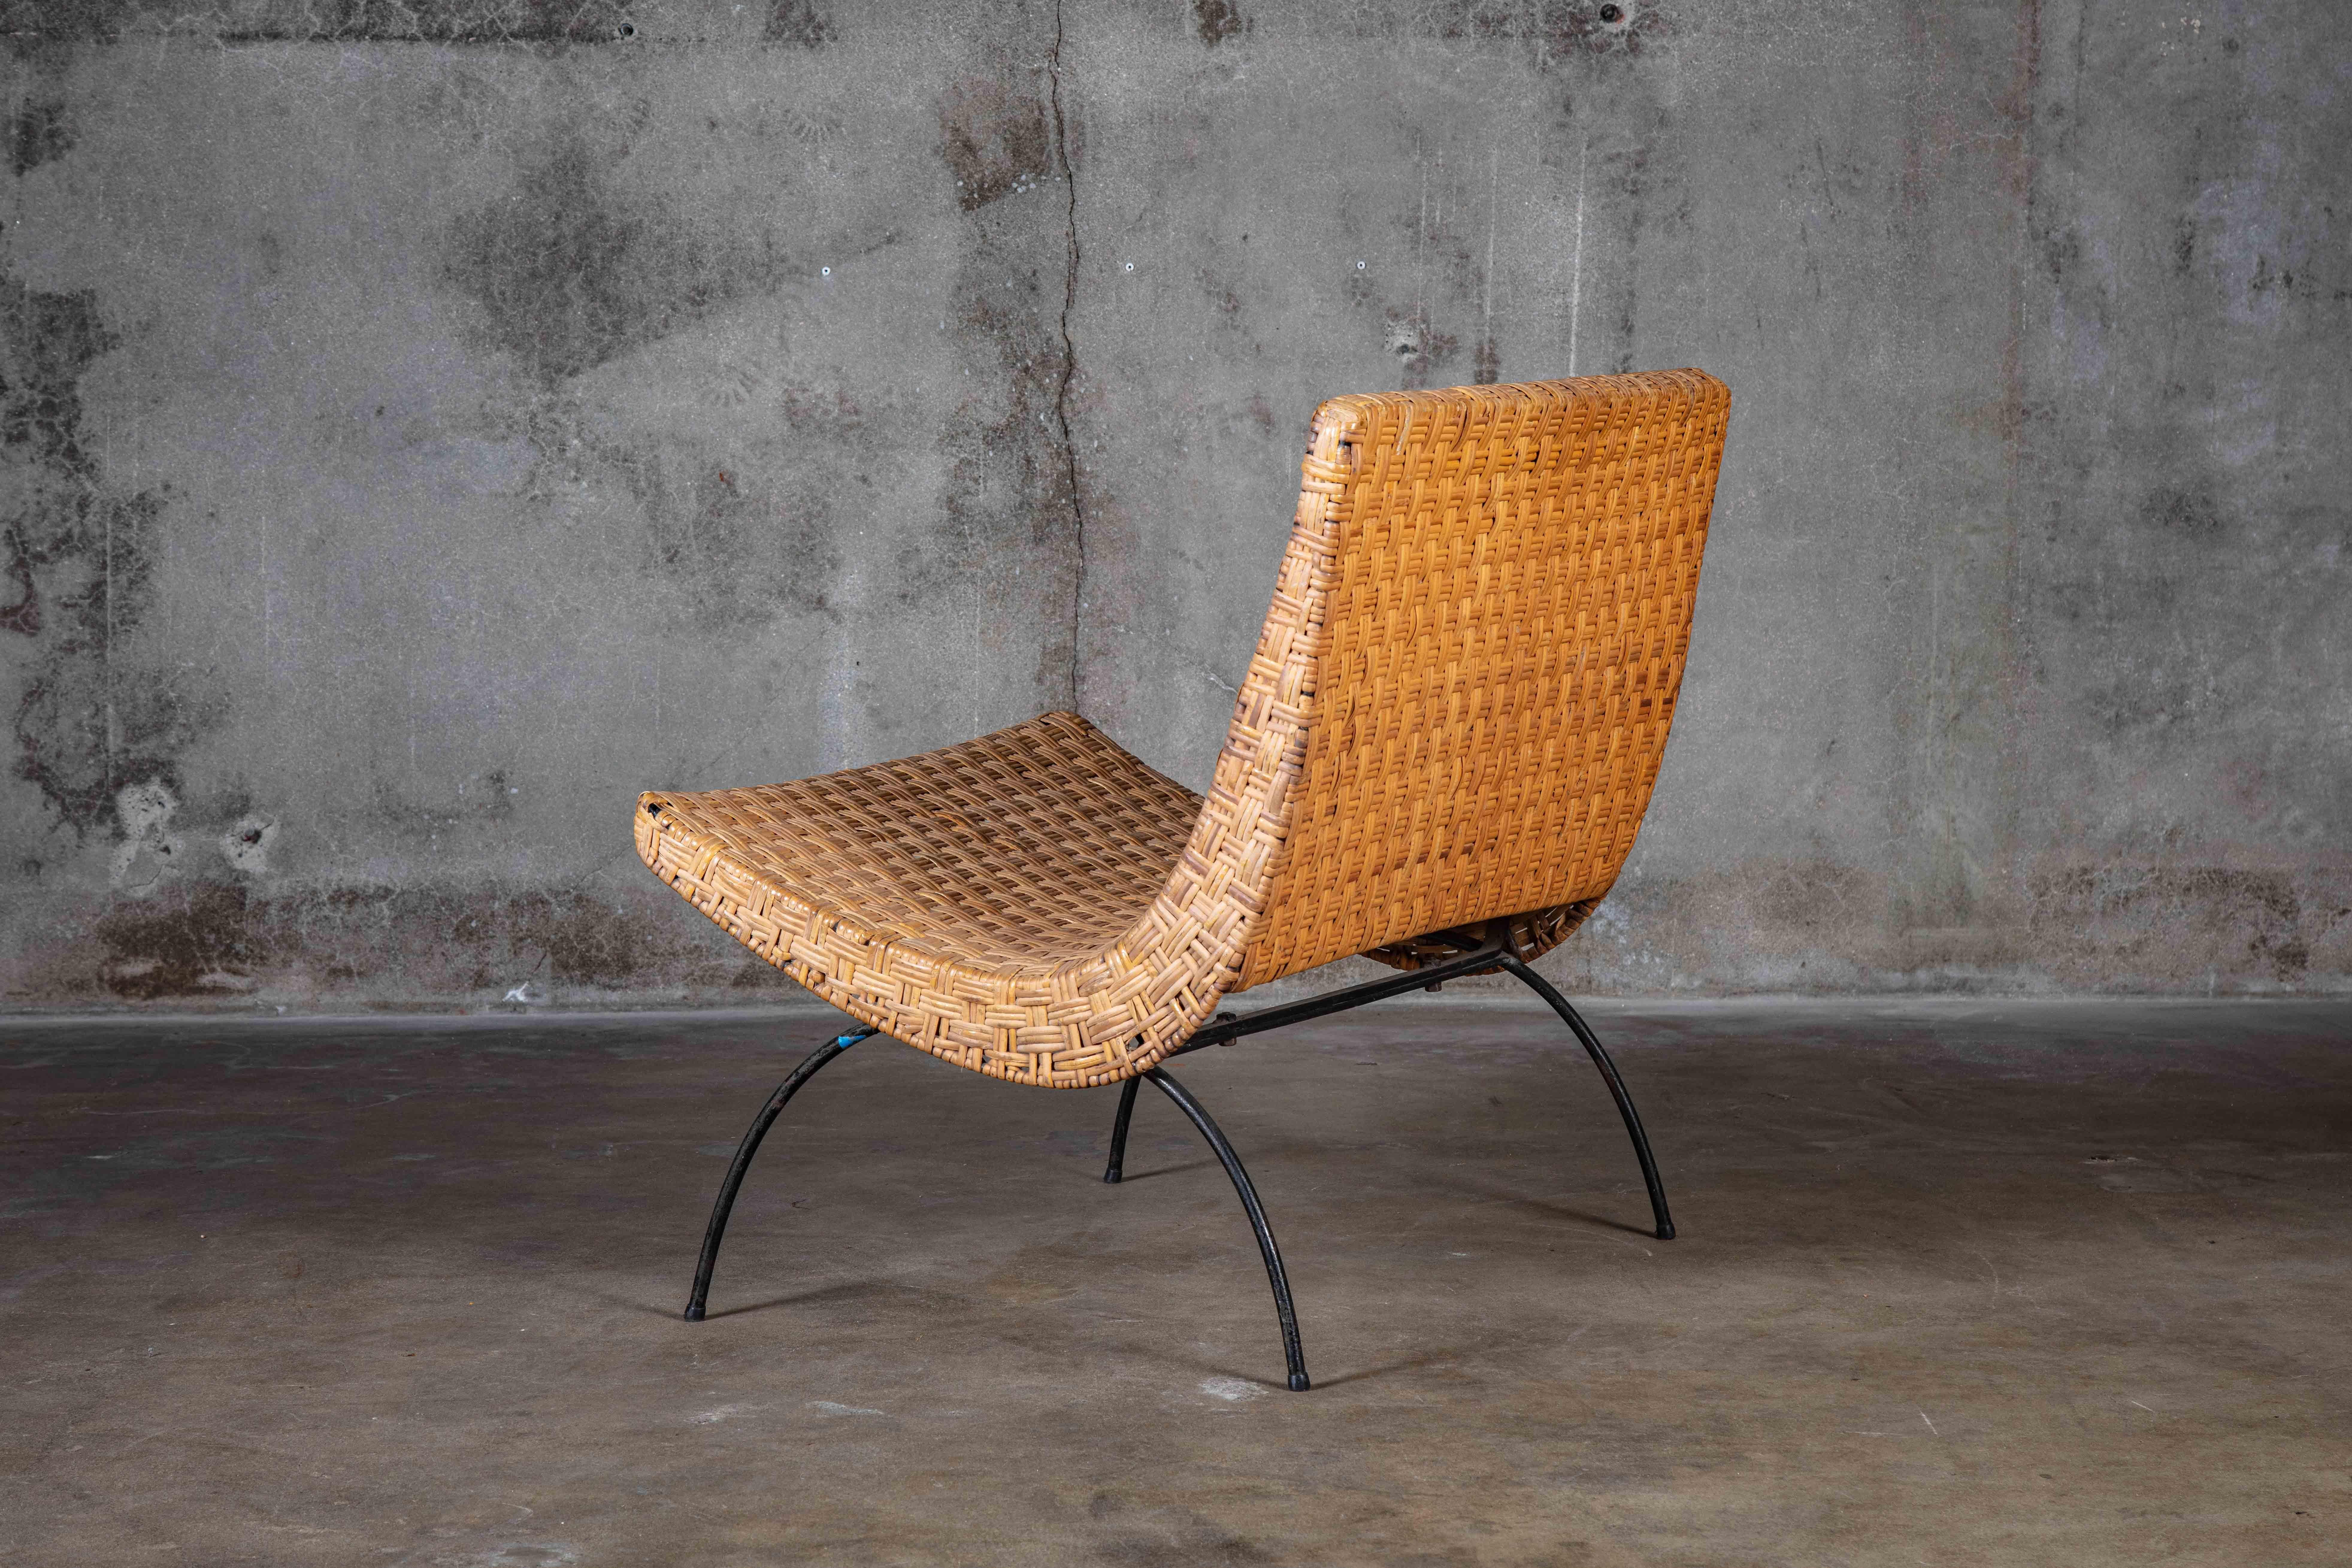 Milo Baughman enameled steel and woven cane lounge chair

Size: Seat 10